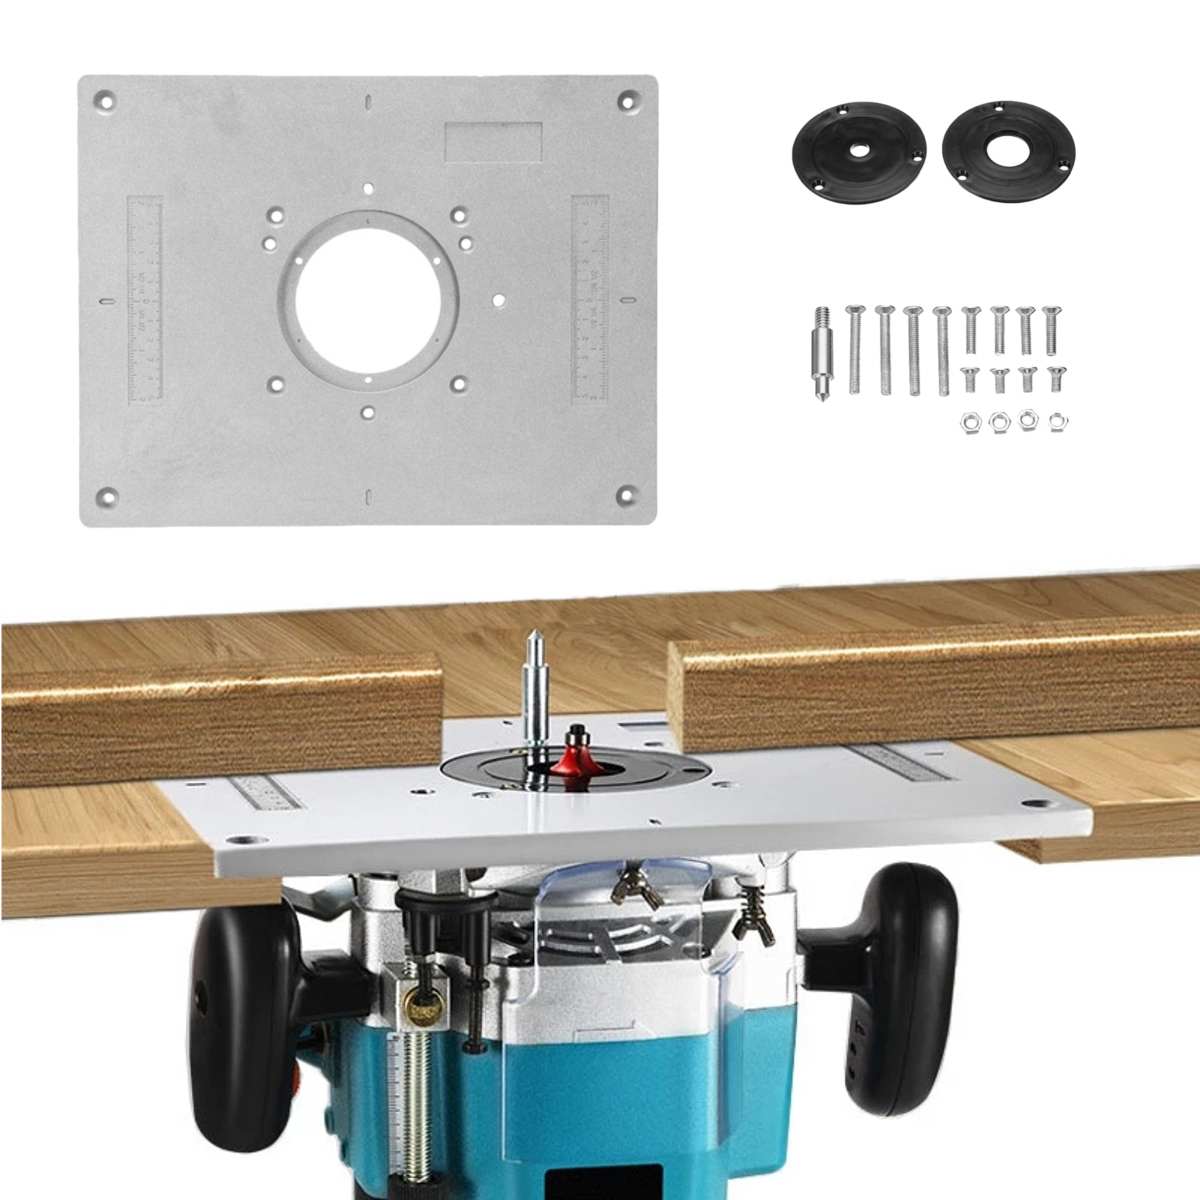 A Set Multifunctional Aluminum Router Table Insert..